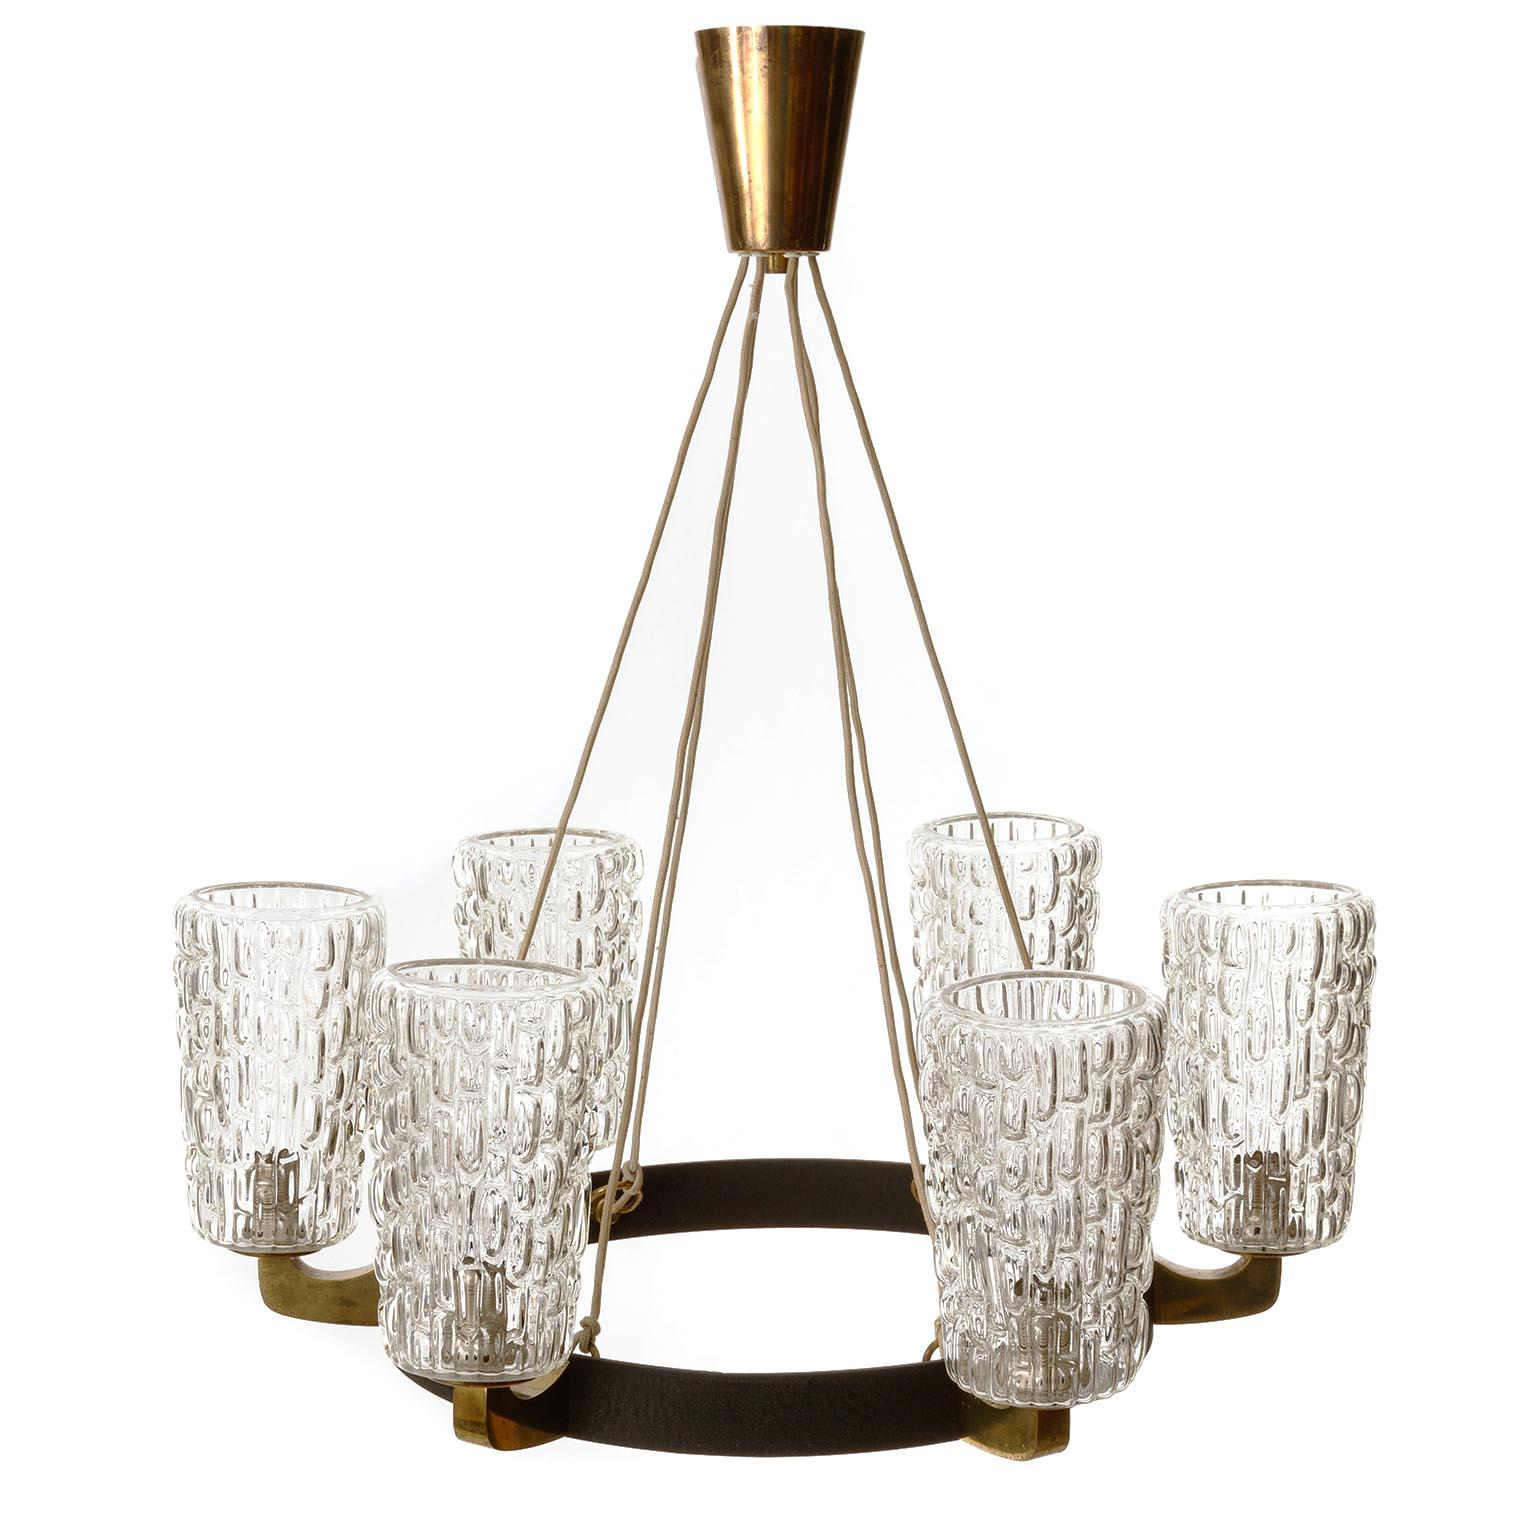 A large six-arm chandelier by Rupert Nikoll, Vienna, manufactured in midcentury, circa 1960 (late 1950s or early 1960s).
The fixture is made of a nice mixture of materials: large textured clear glass lamp shades, solid polished brass and black